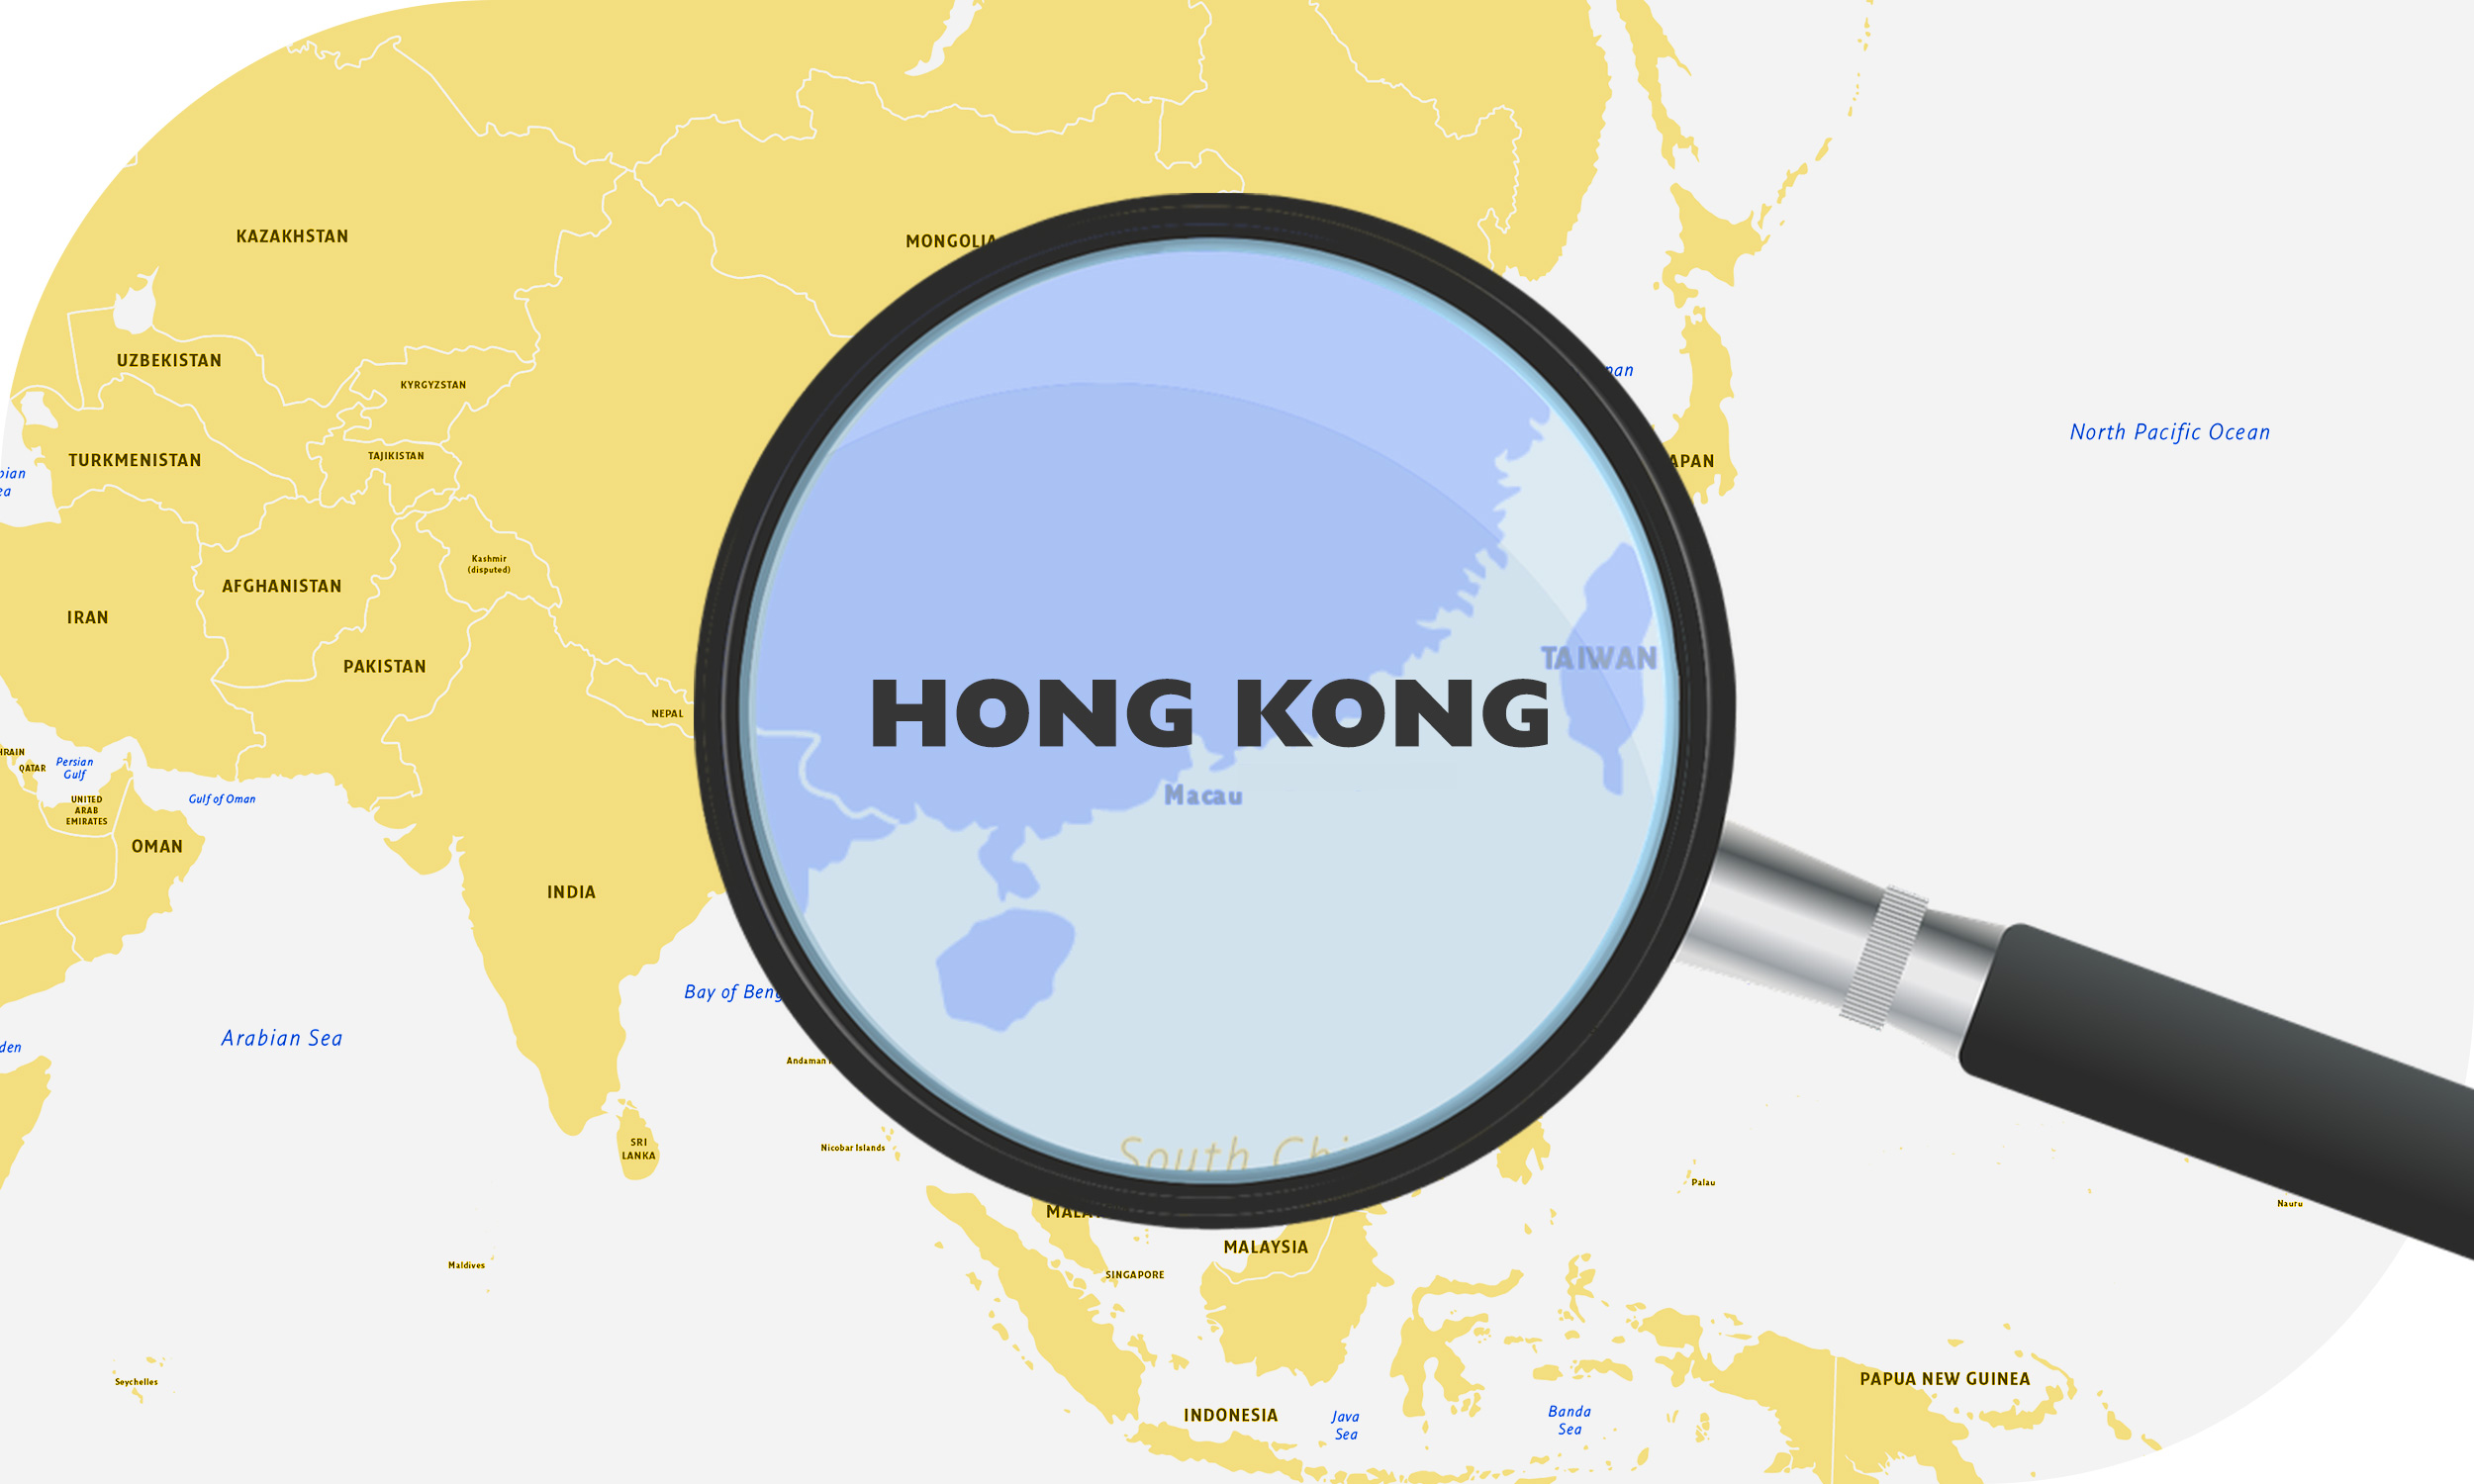 Map of southeast Asia showing Hong Kong as a delivery destination